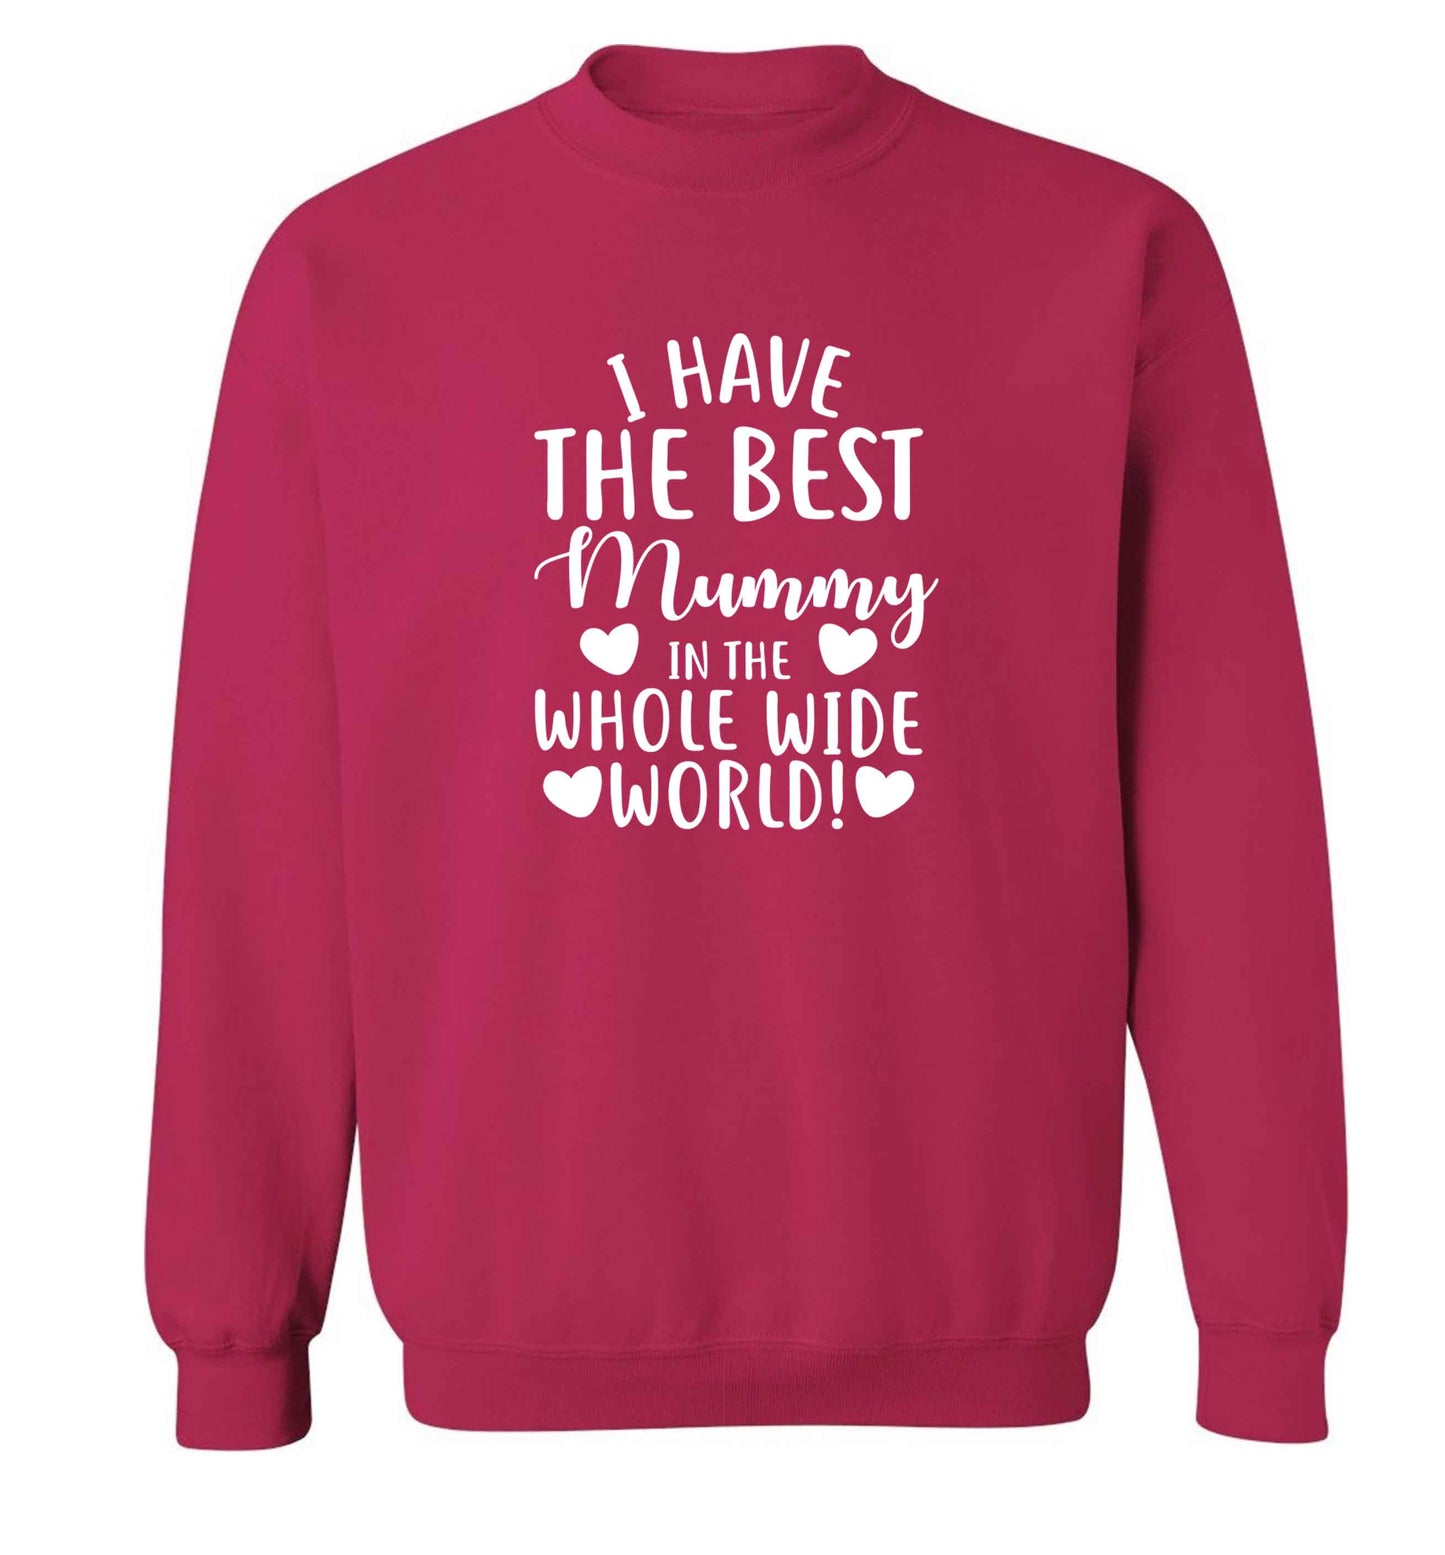 I have the best mummy in the whole wide world adult's unisex pink sweater 2XL